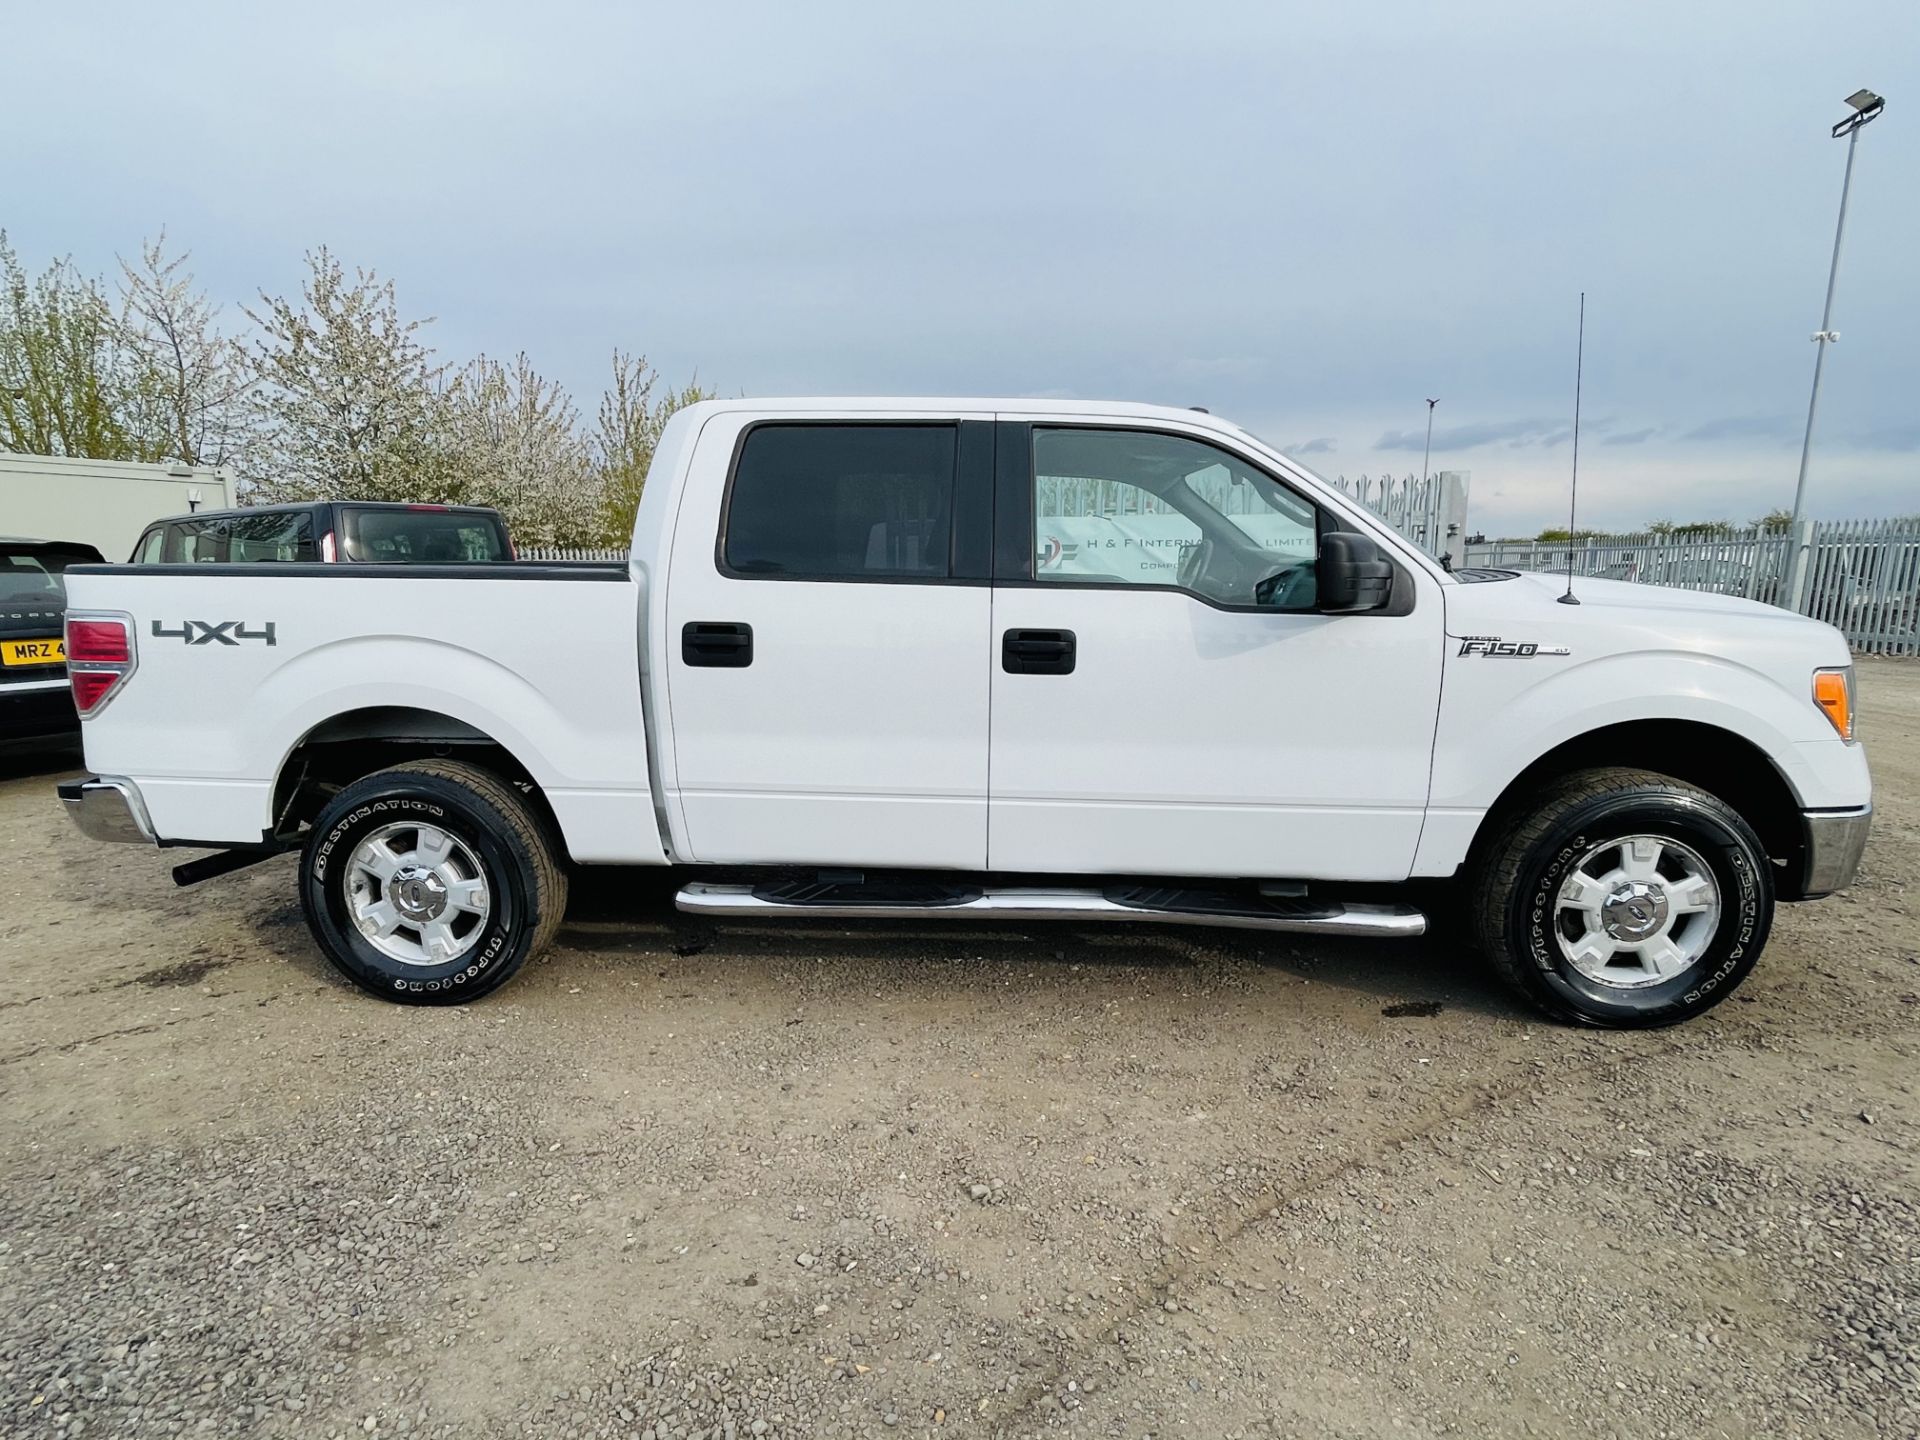 ** ON SALE ** Ford F-150 XLT 4.6L V8 Super-crew 4WD 2010 ' 2010 Year' 6 Seats - Air con - - Image 13 of 24